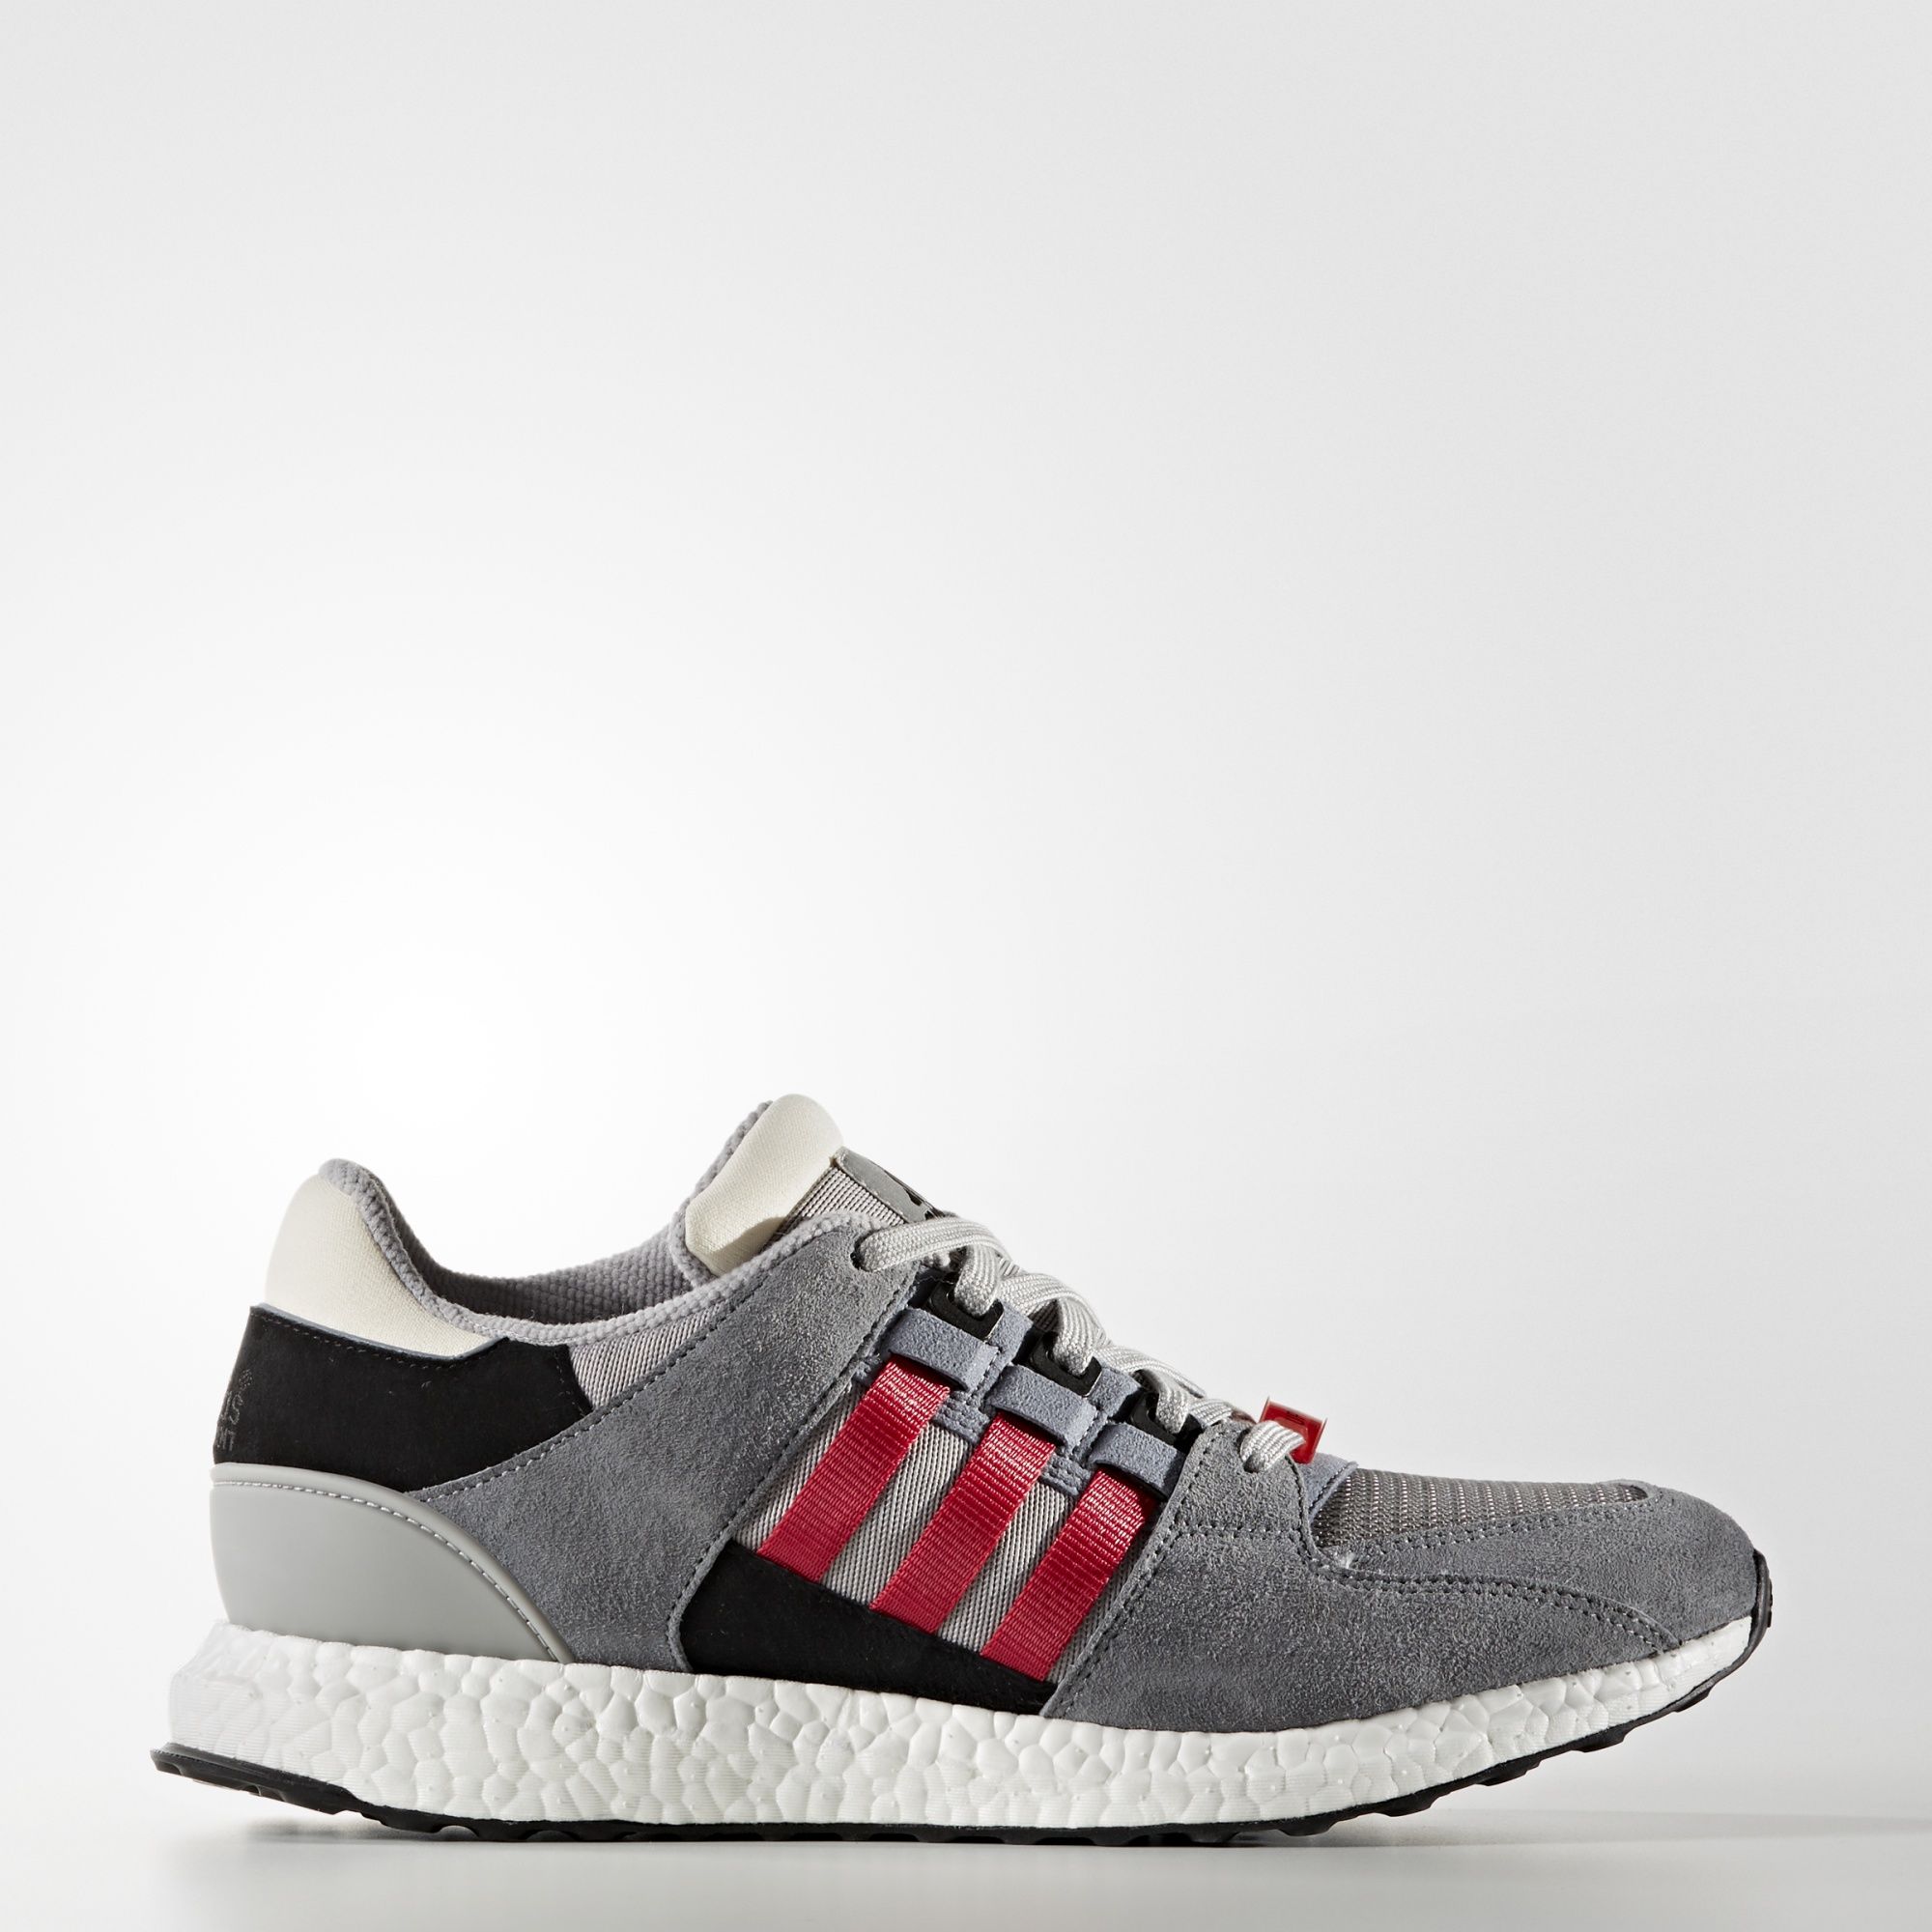 Adidas EQT Support 93/16
Mgh Solid Grey / Collegiate Red / Grey